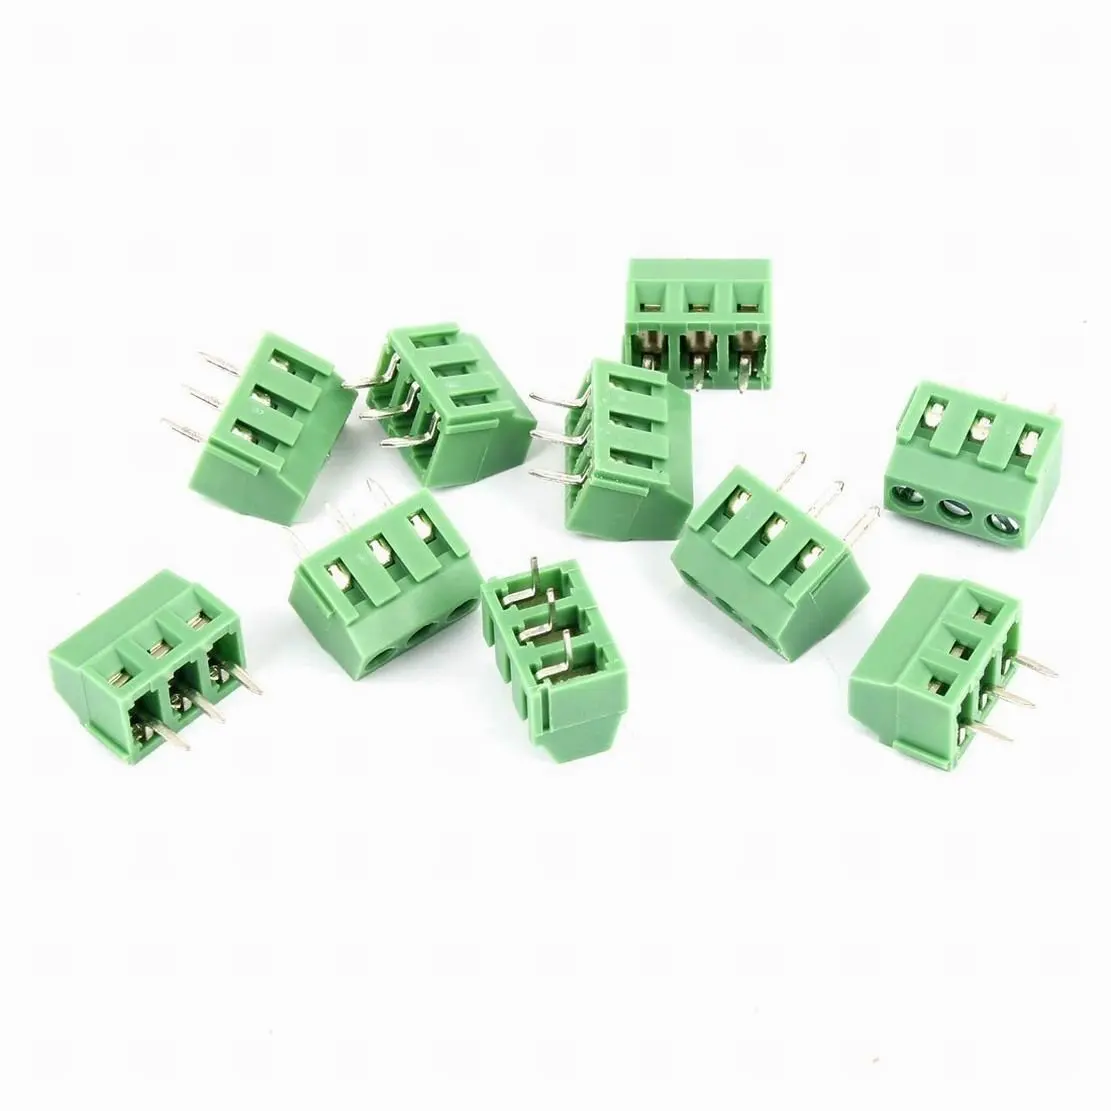 Rated 300V10A 3.81mm Pitch, 2P E-Simpo 0.15 Pitch PCB Screw Terminal Block 2Poles PCB Screw Terminal Block Connector 3.81mm